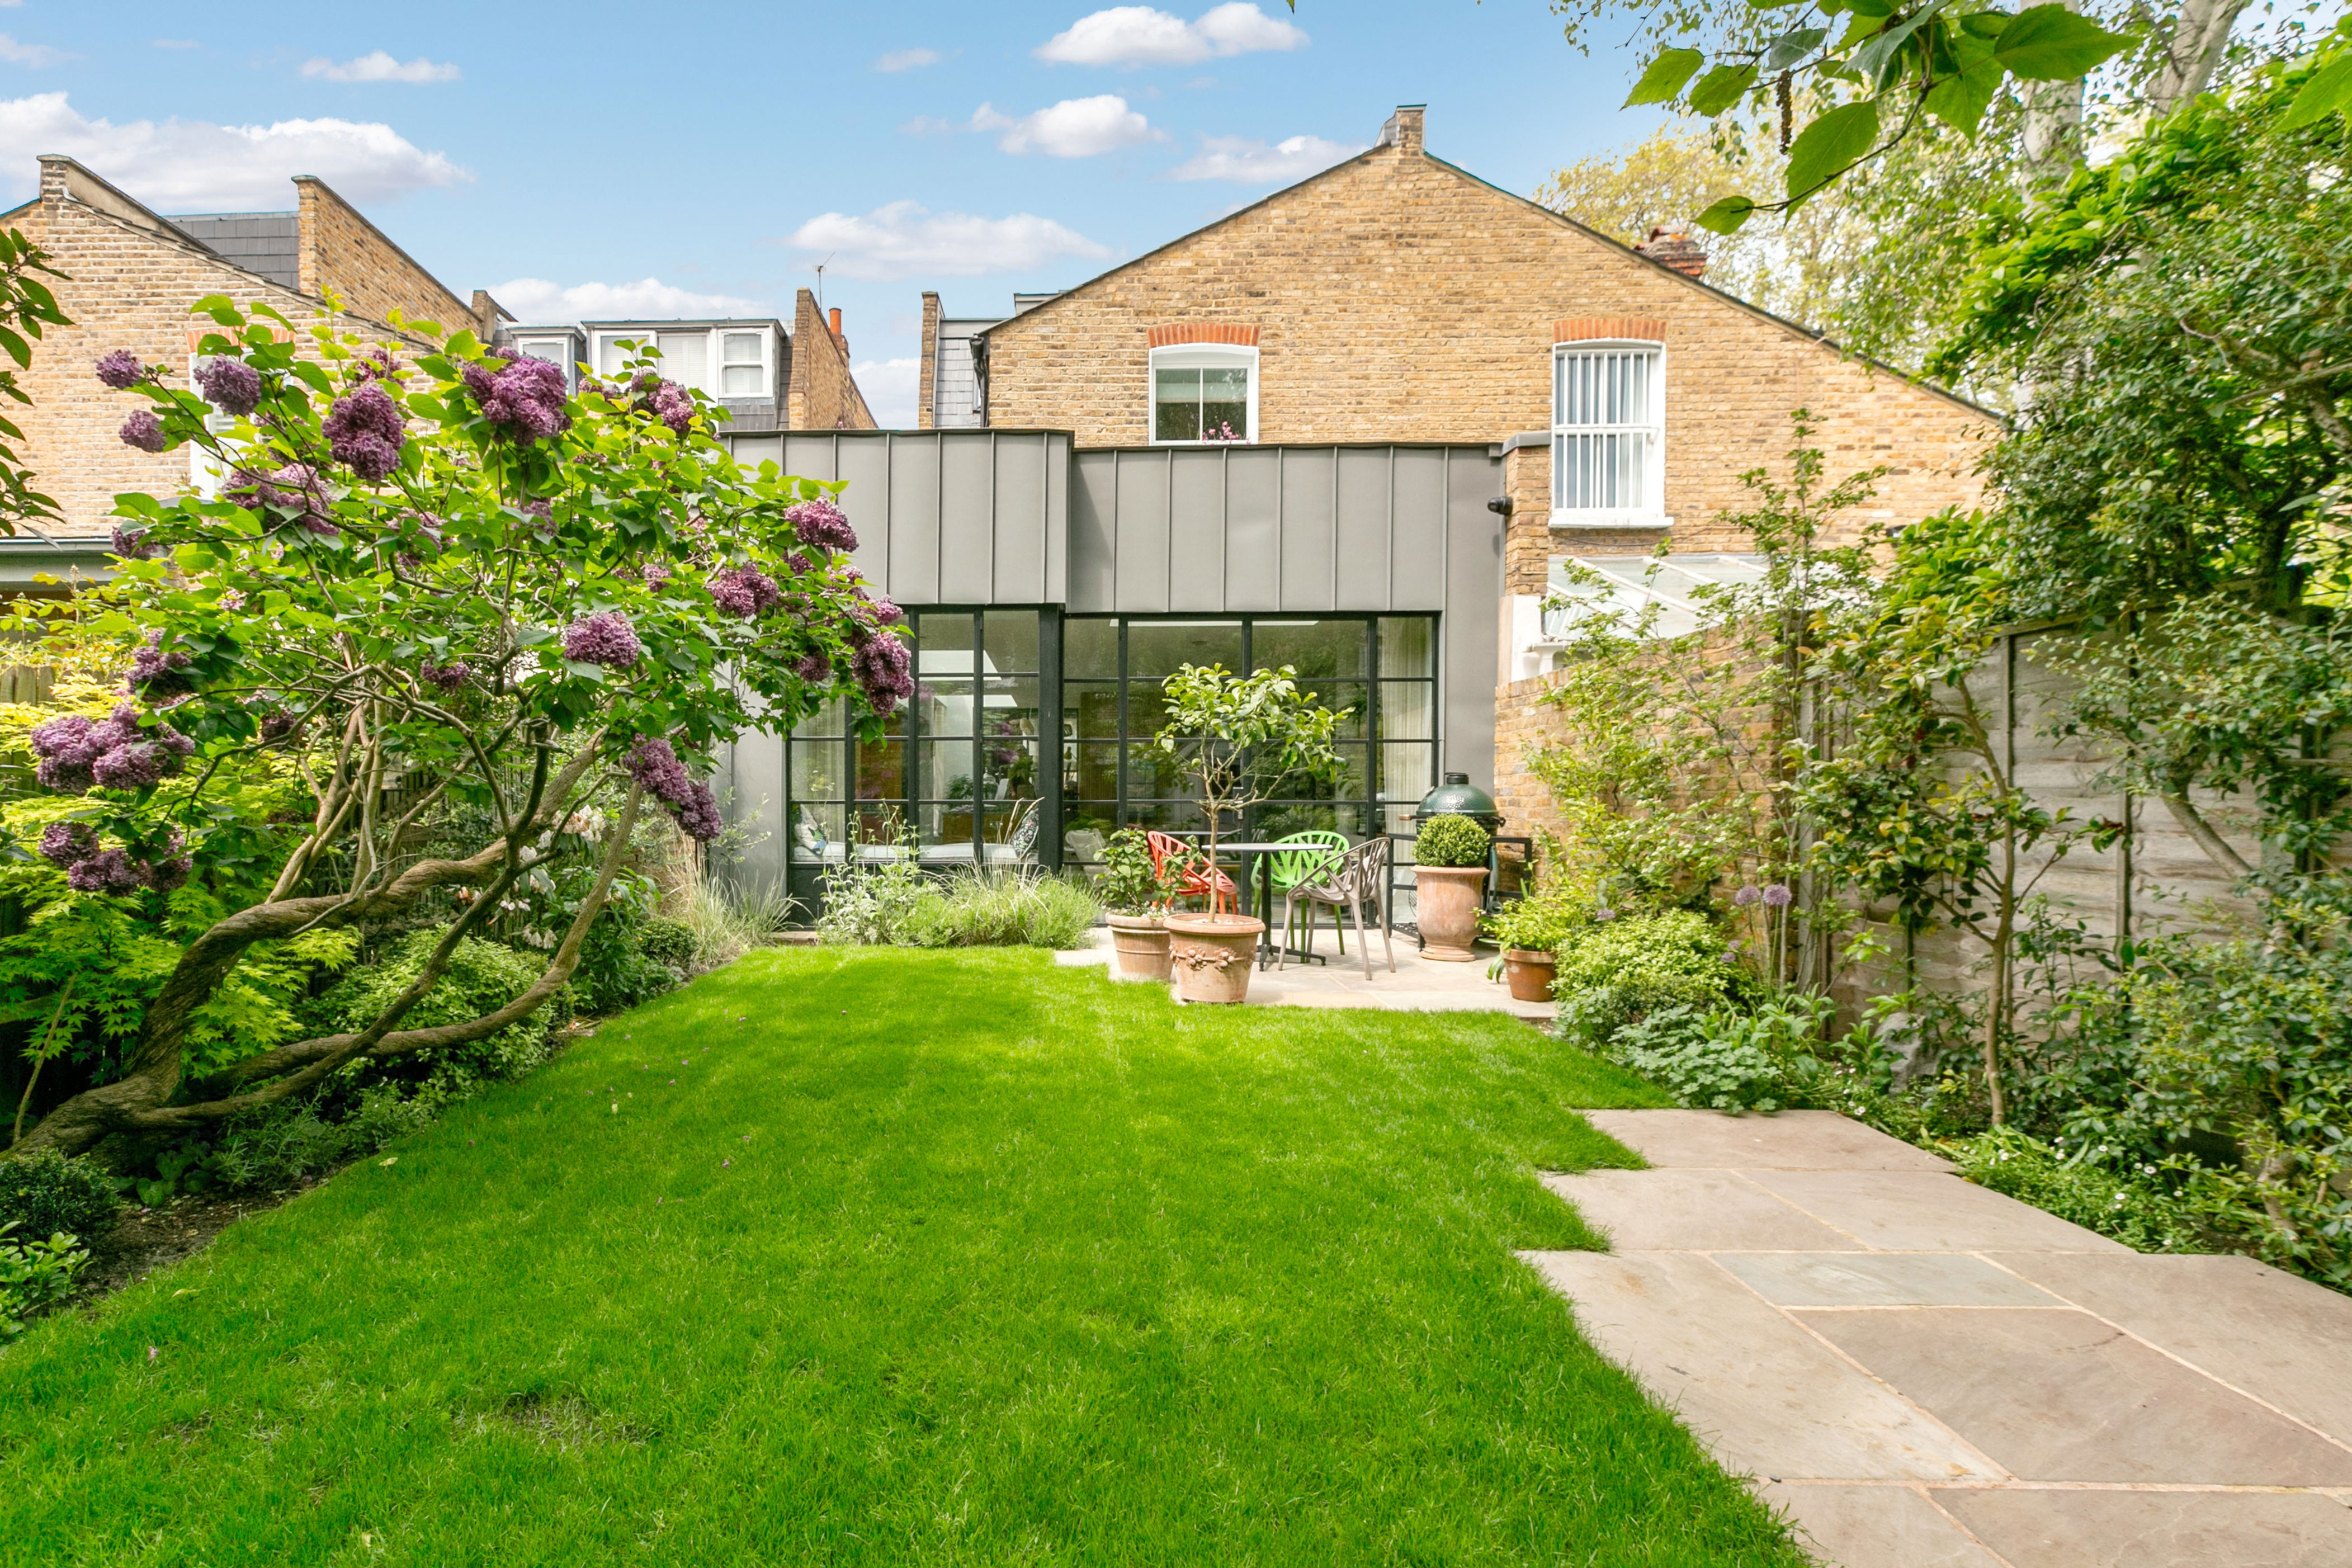 green machine: fulham eco home retrofitted with passivhaus technology on the market for £3.5m